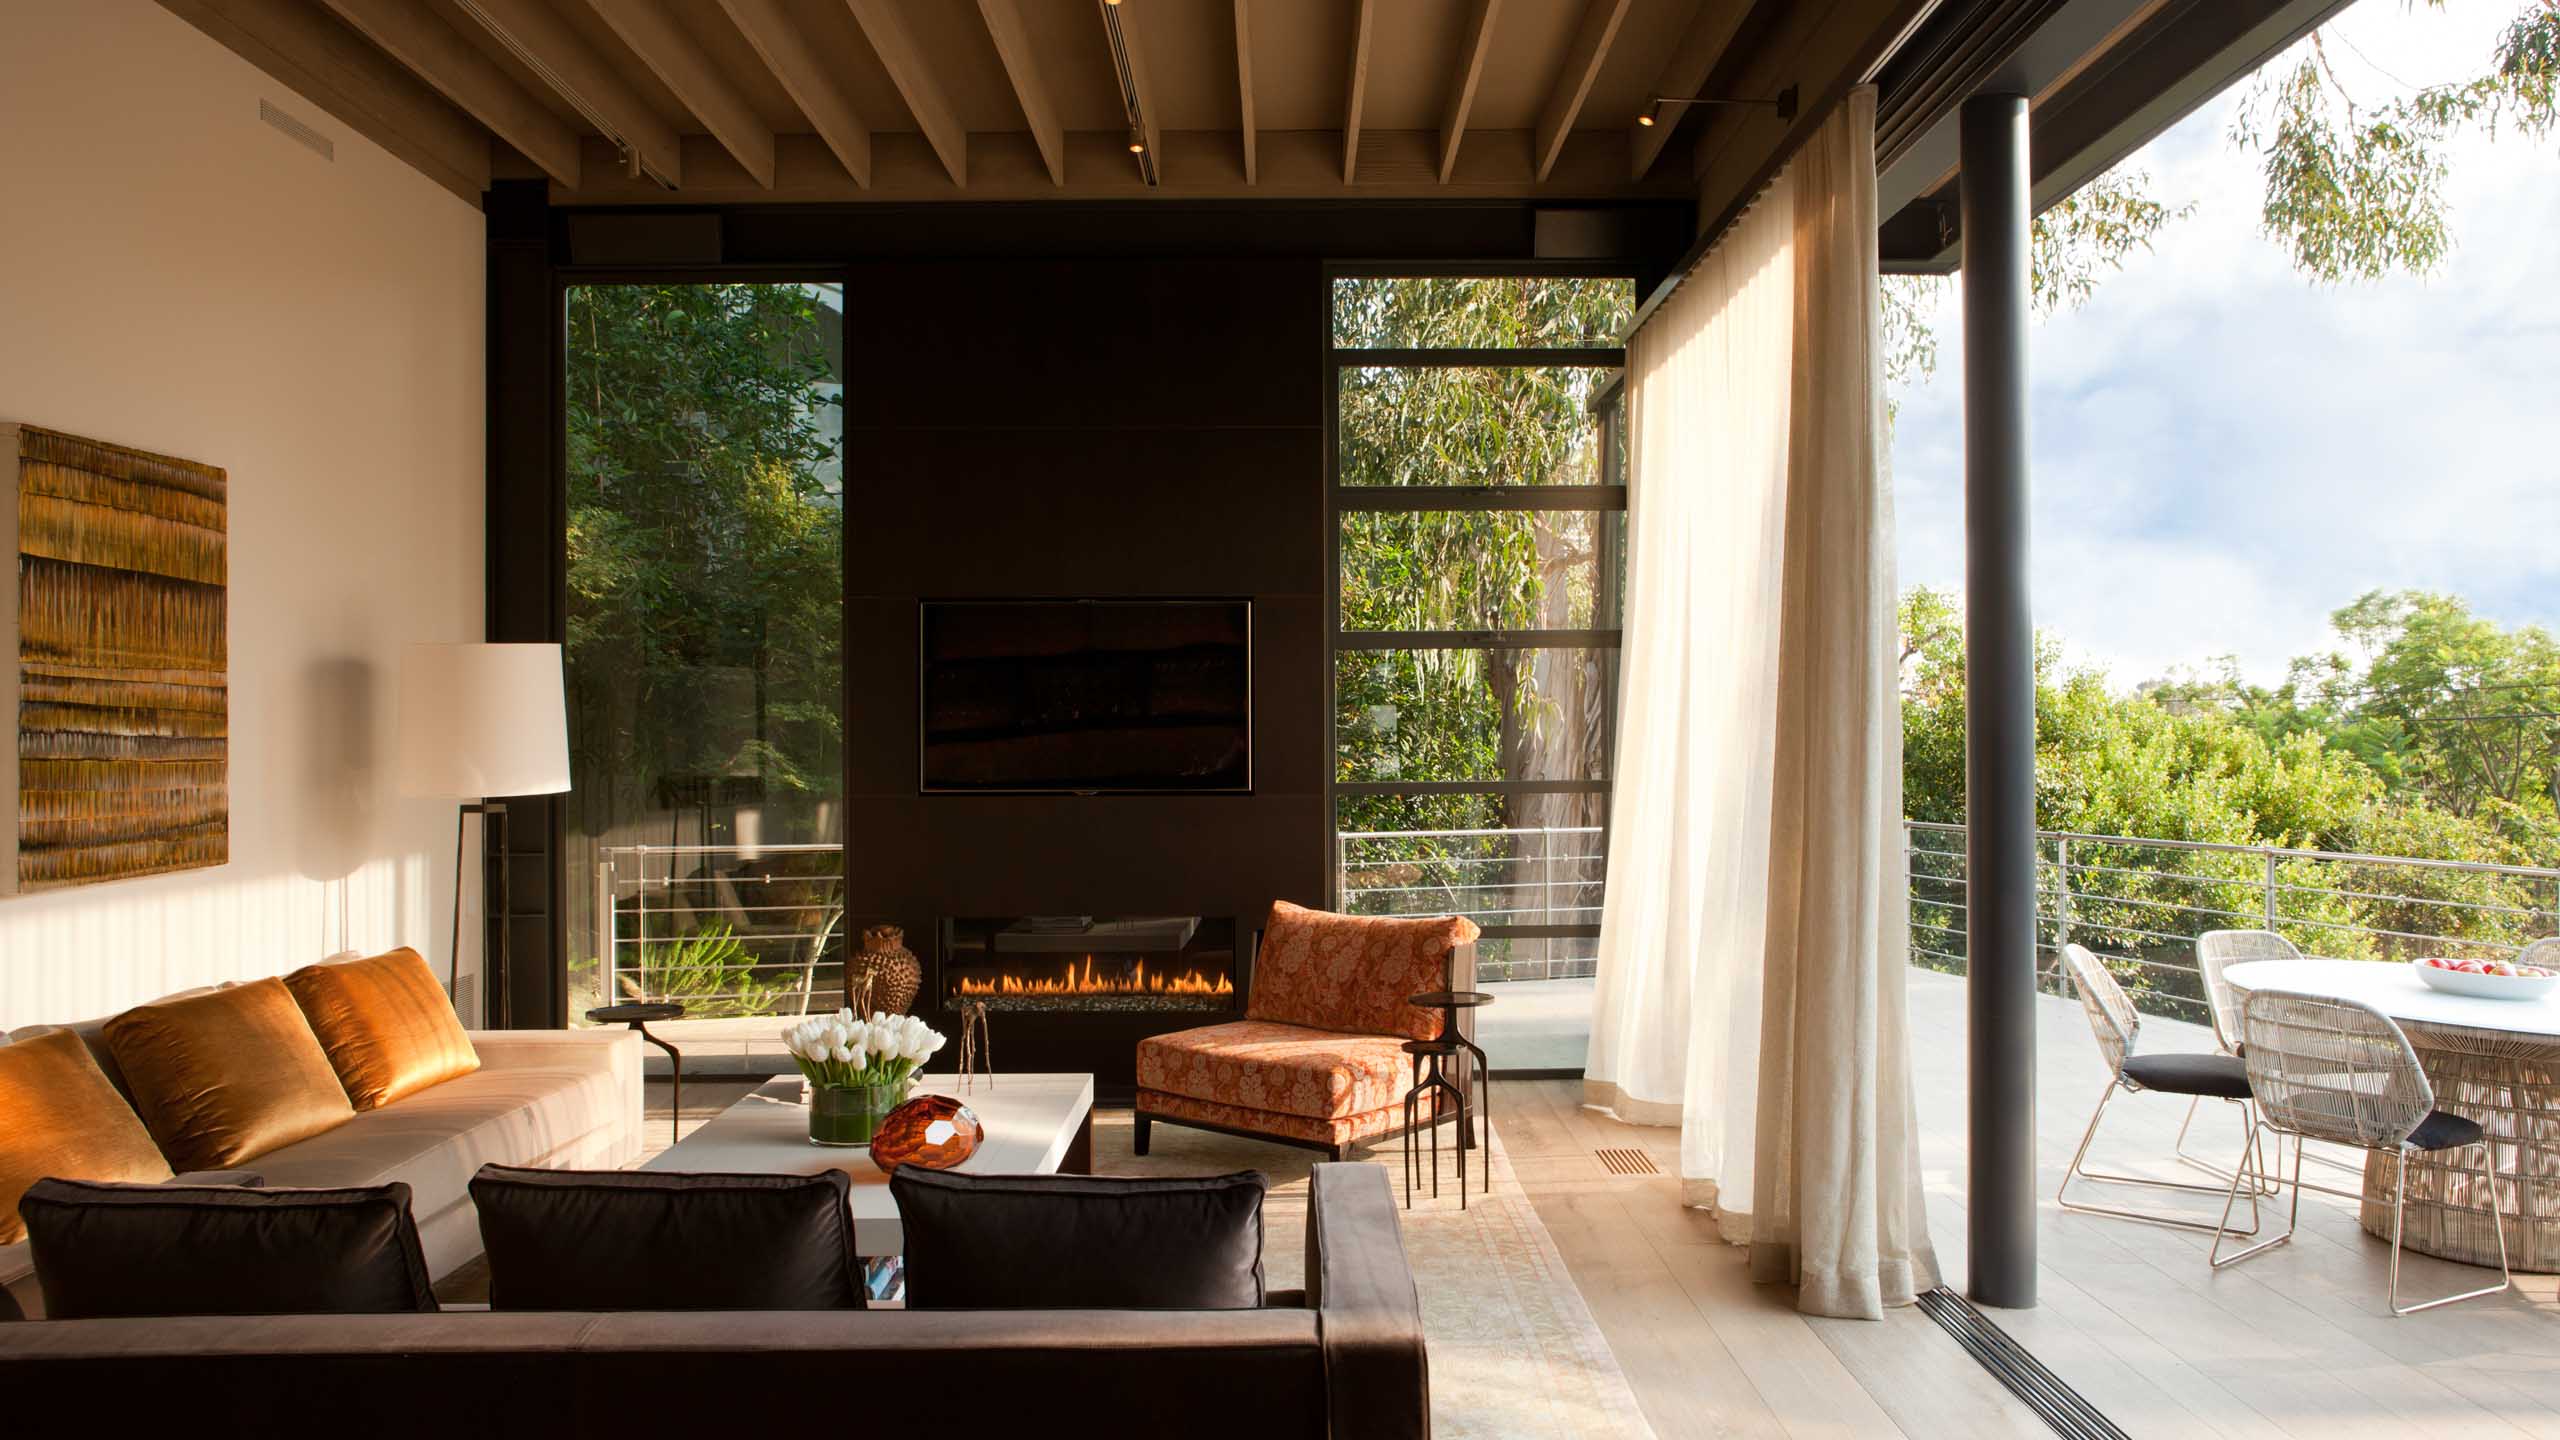 Living room open to the outdoor deck with bronze and gold furniture